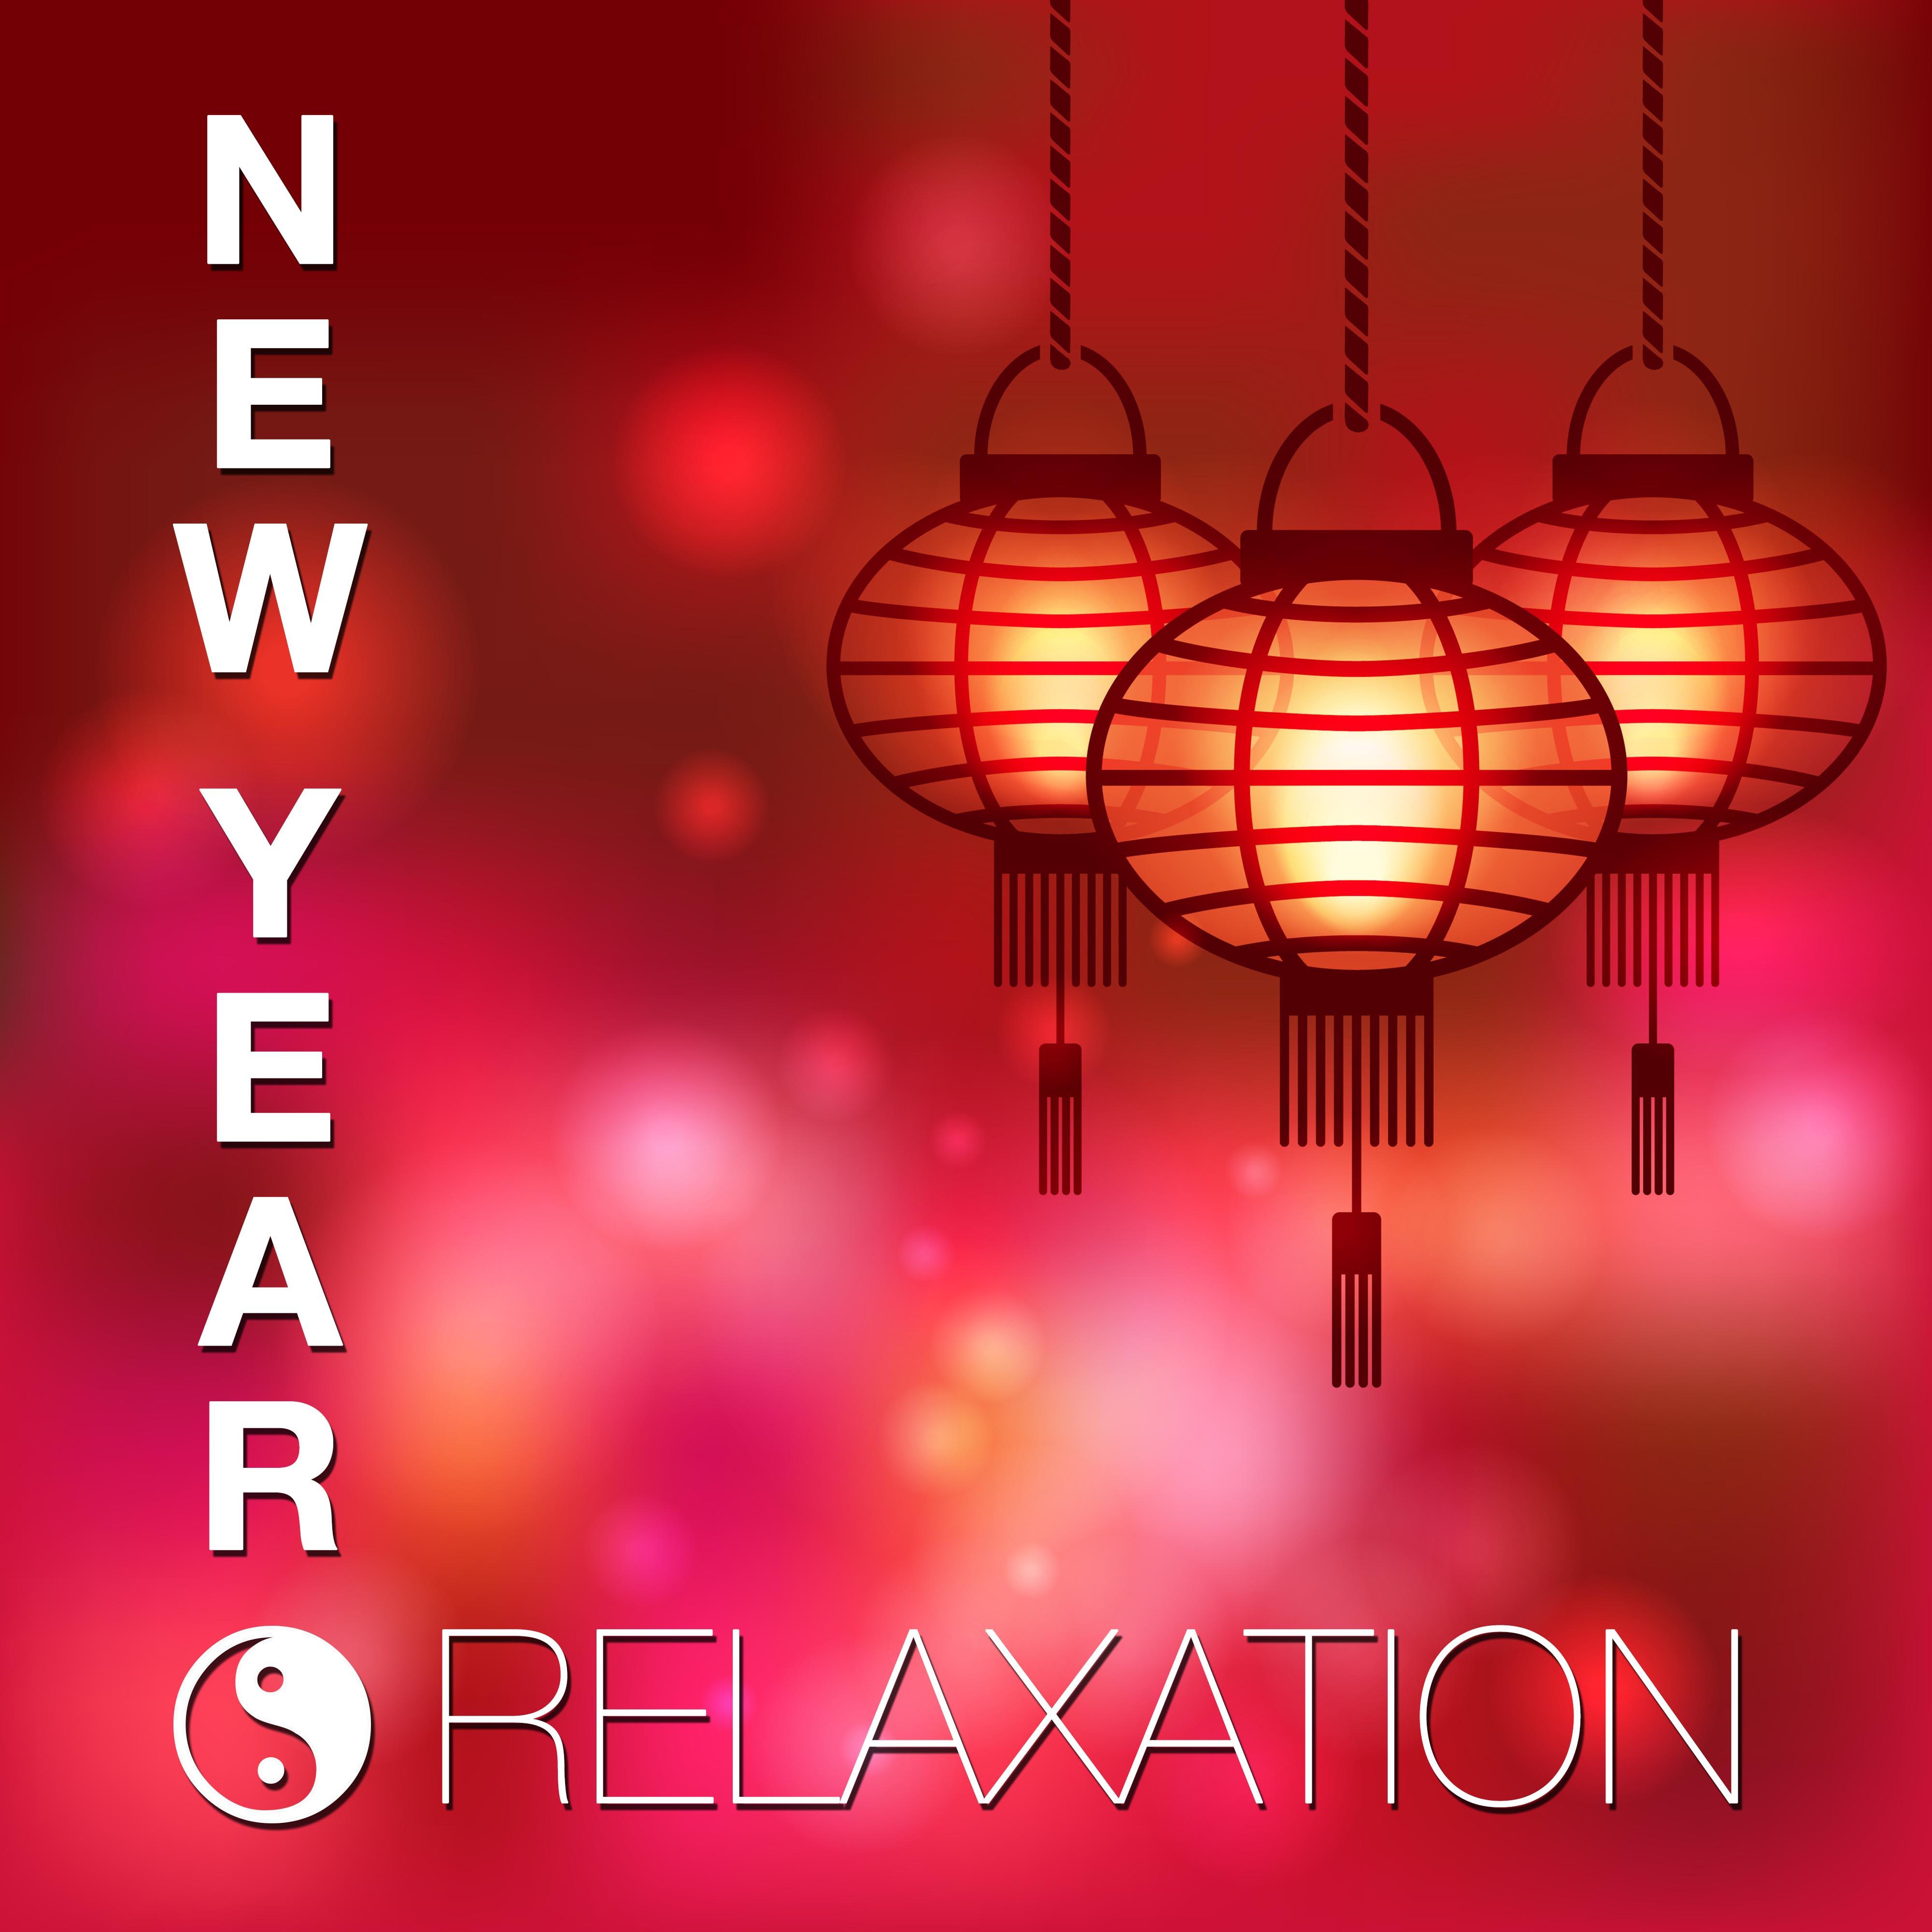 New Year's Eve Relaxation: Smooth Jazz and Soulful House Music to Relax and Unwind